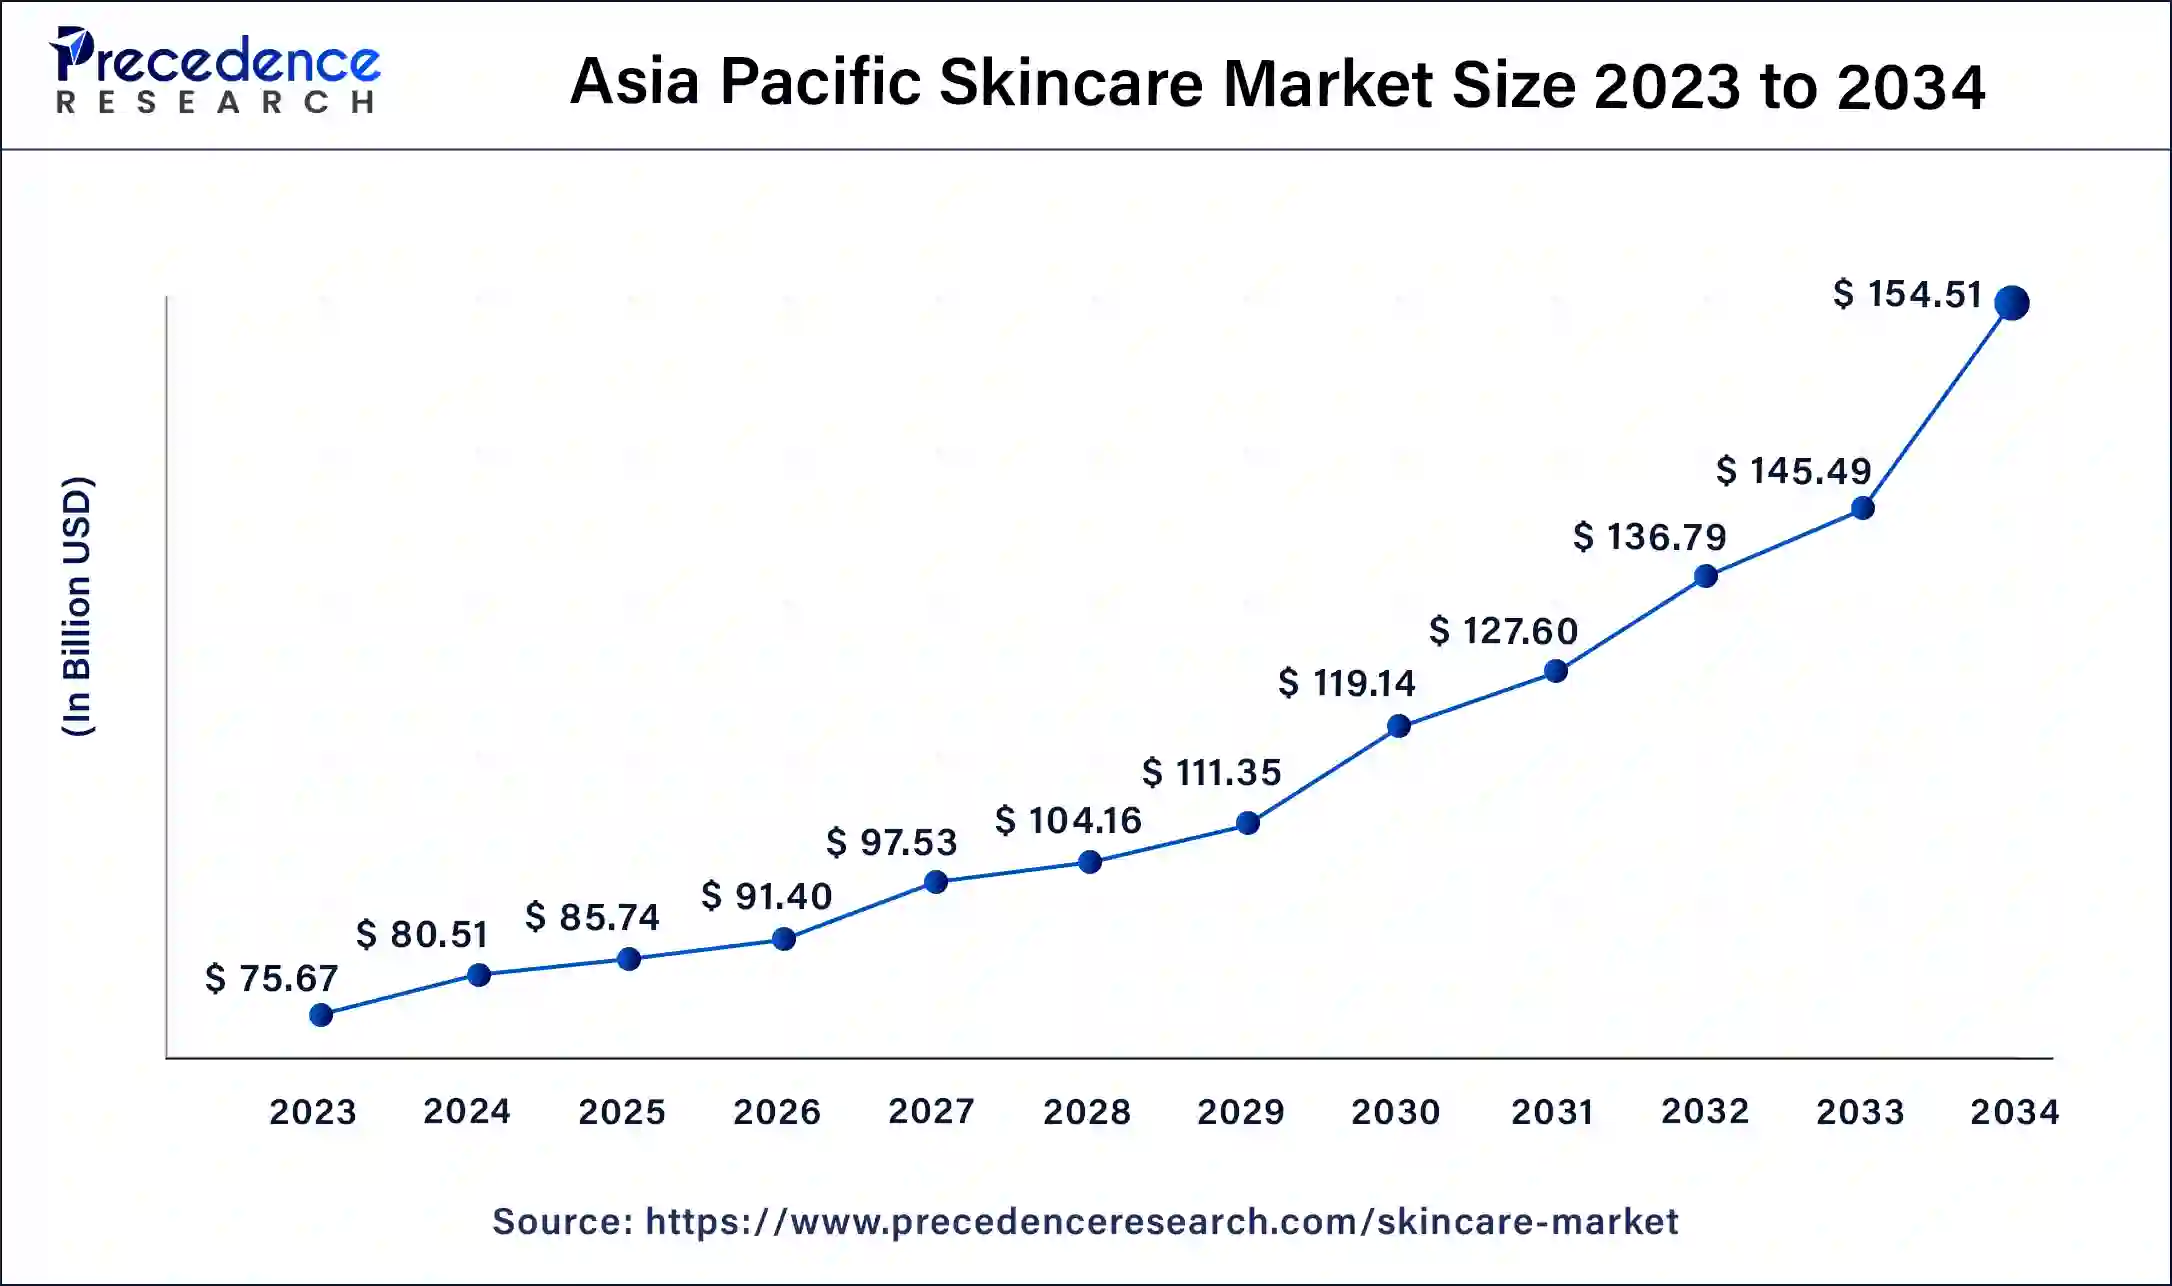 Asia Pacific Skincare Market Size 2024 To 2034